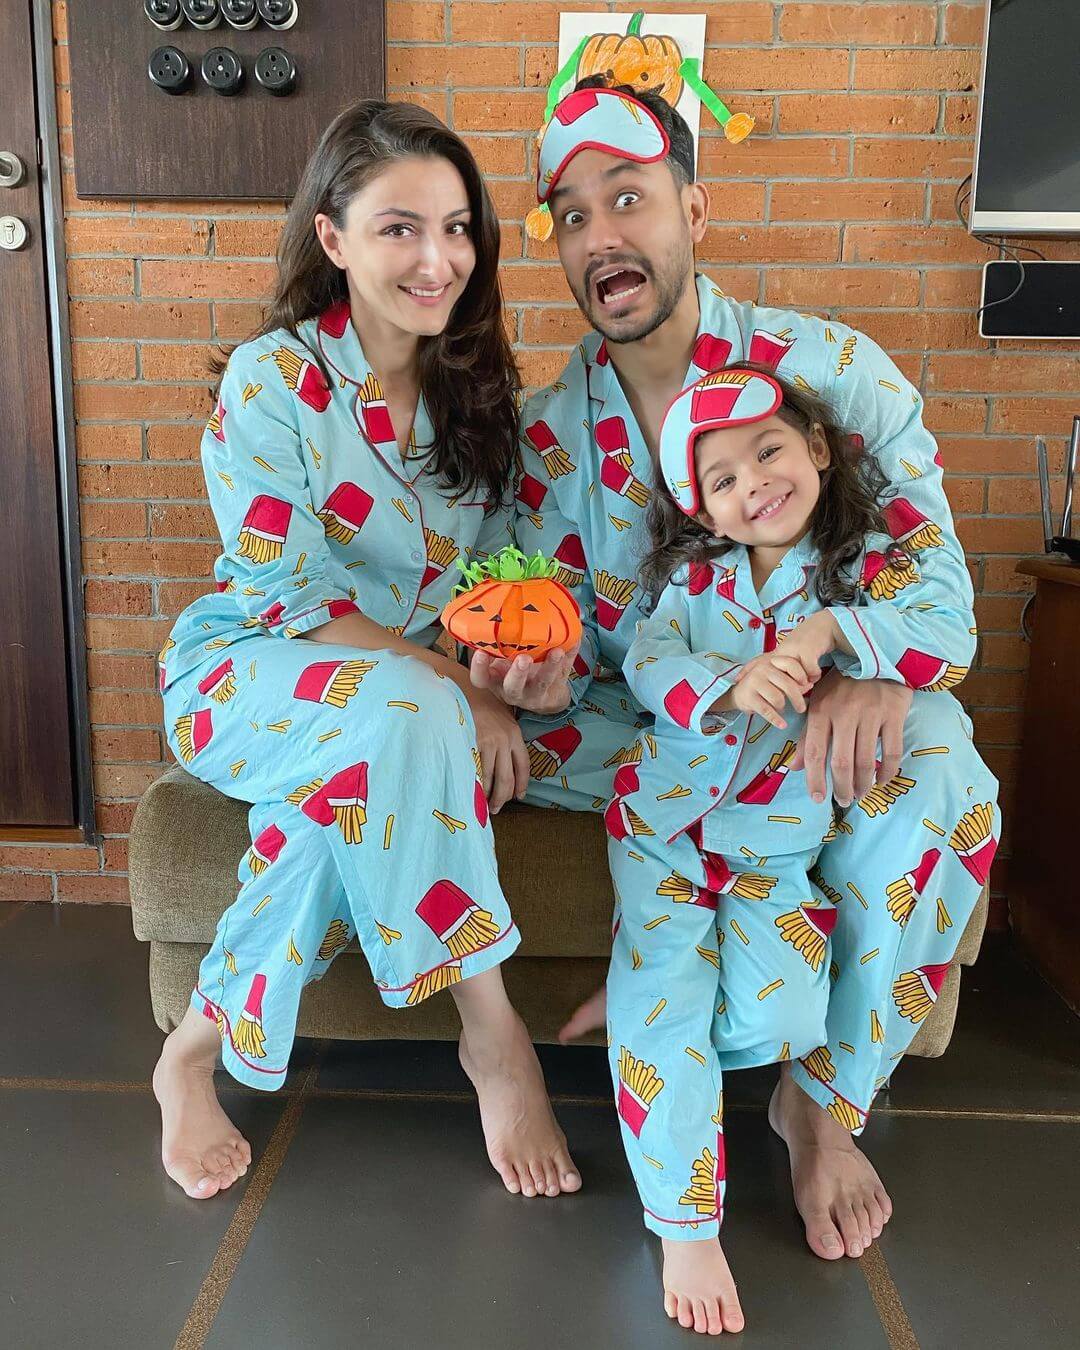 Halloween Celebration With Bollywood Celebrities soha ali khan and kunal khemu Made Paper Pumpkins With Their Daughter